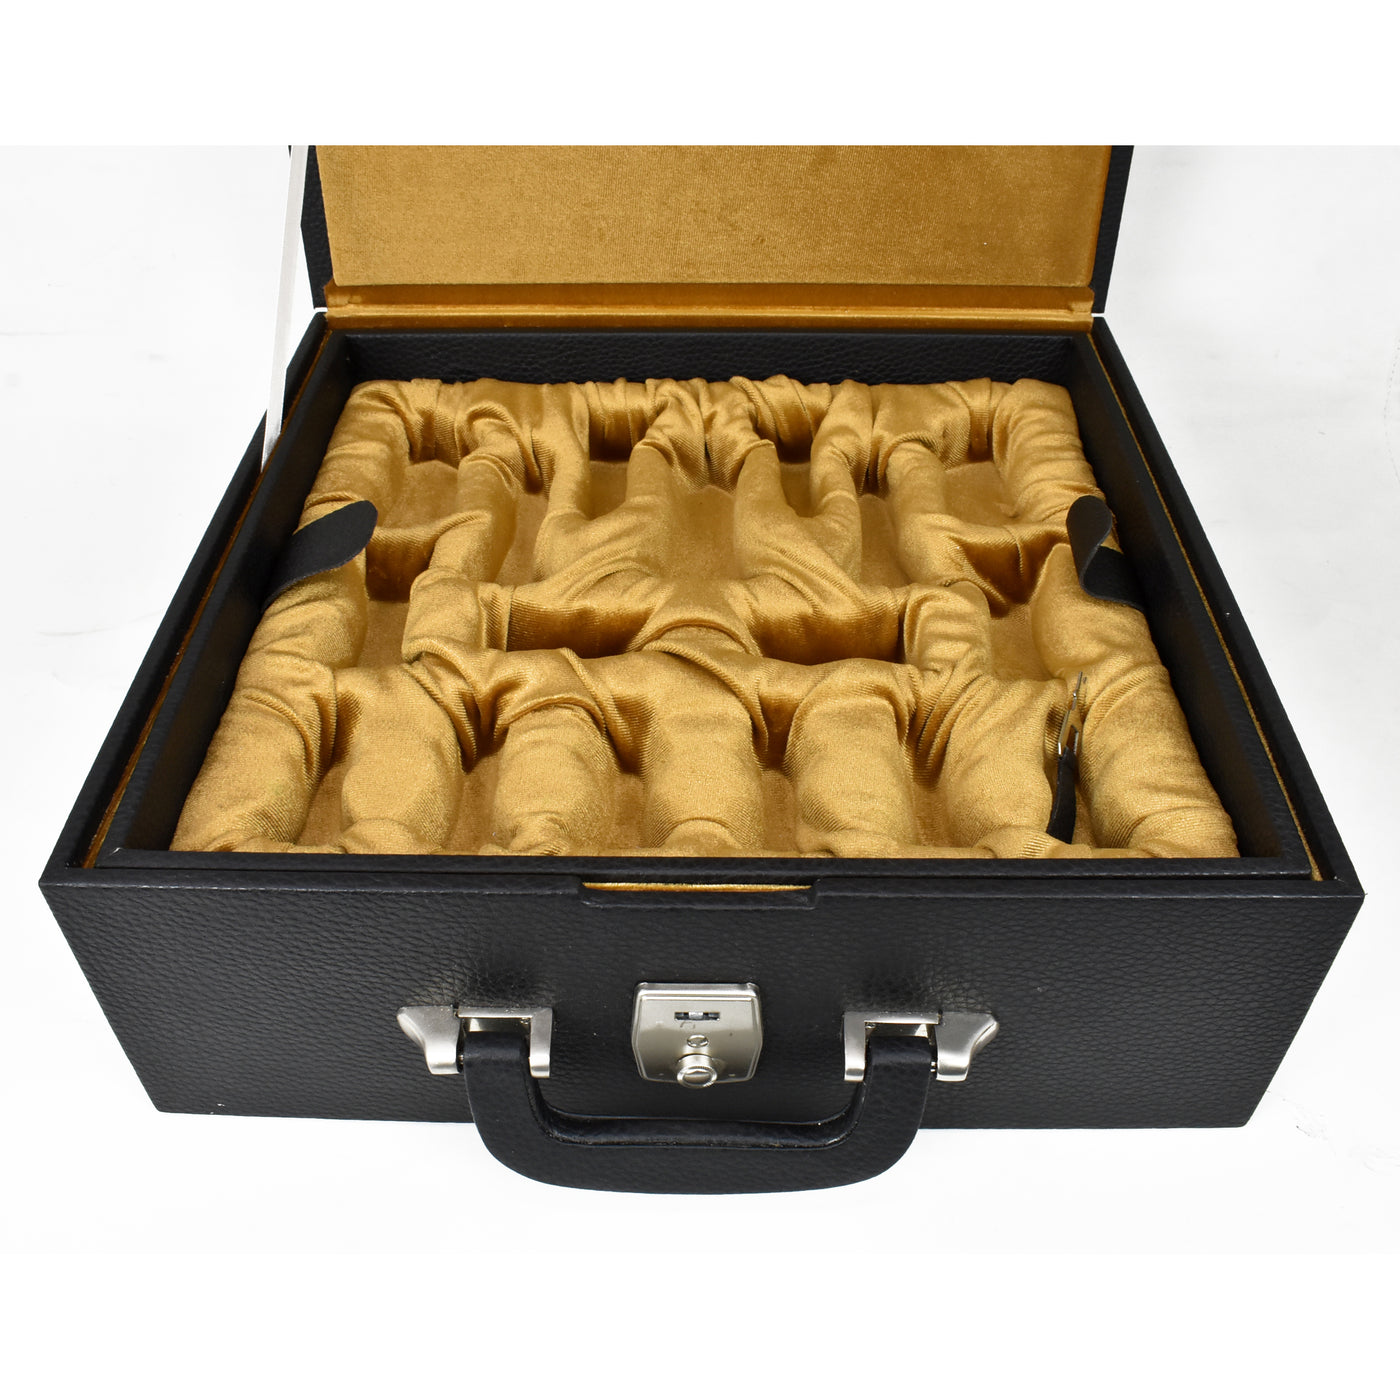 Combo of Golden Rosewood - 3.9" Craftsman Series Staunton Chess Pieces With 21" Drueke Chess board and Leatherette Coffer Storage Box